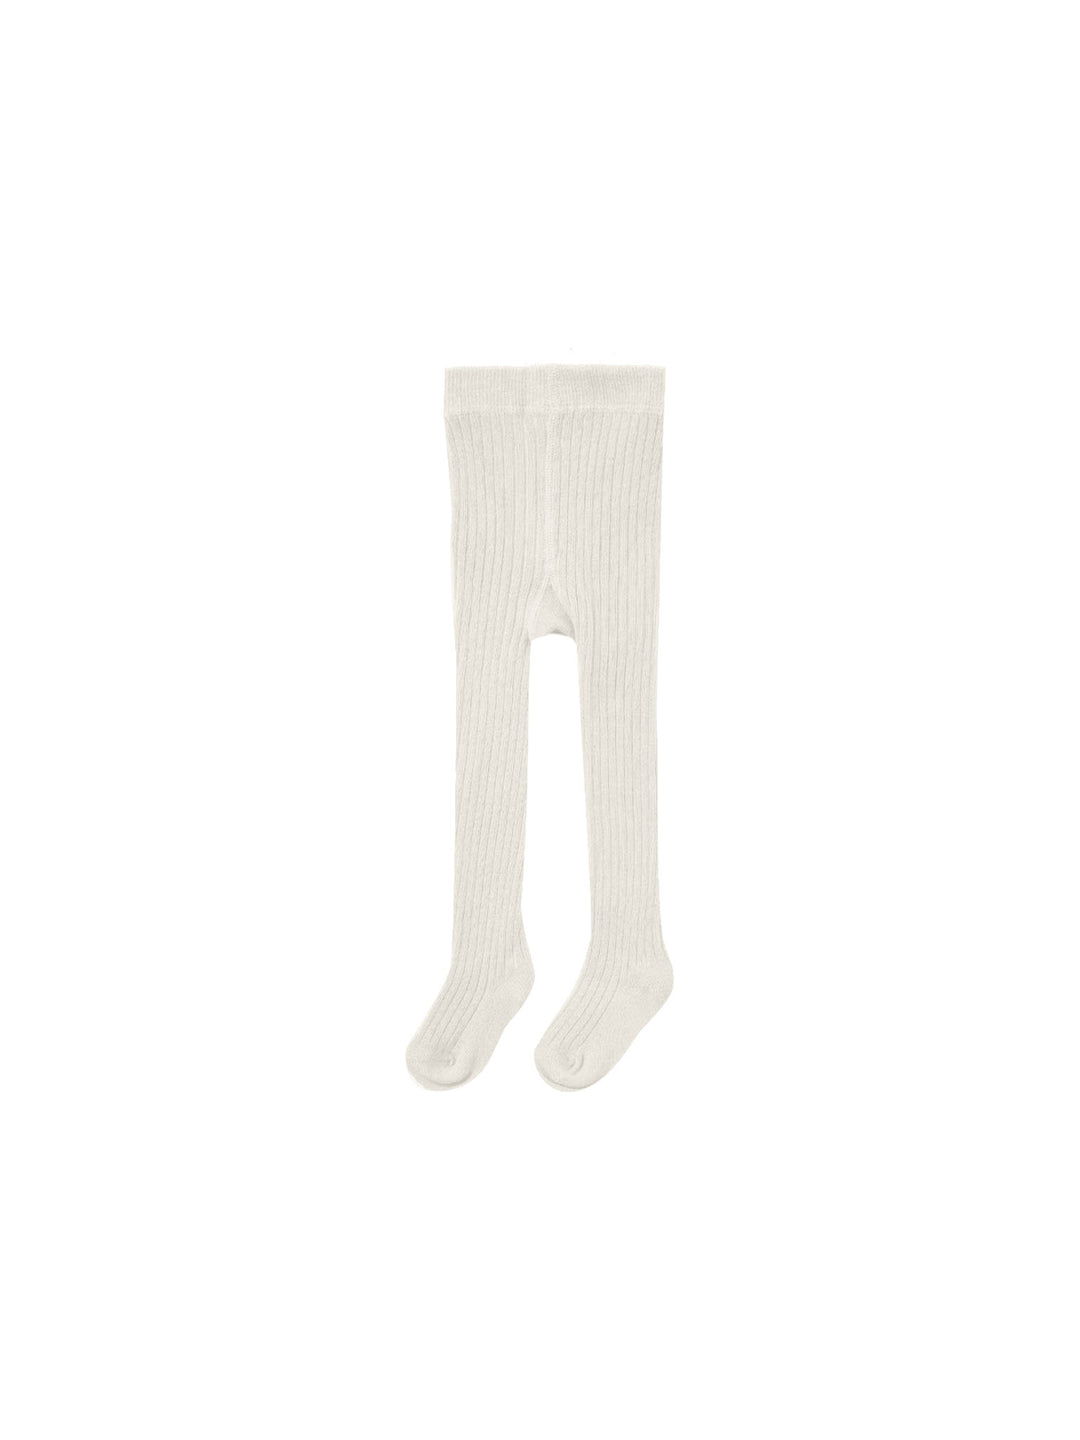 Quincy Mae Solid Tights, Ivory |Mockingbird Baby & Kids